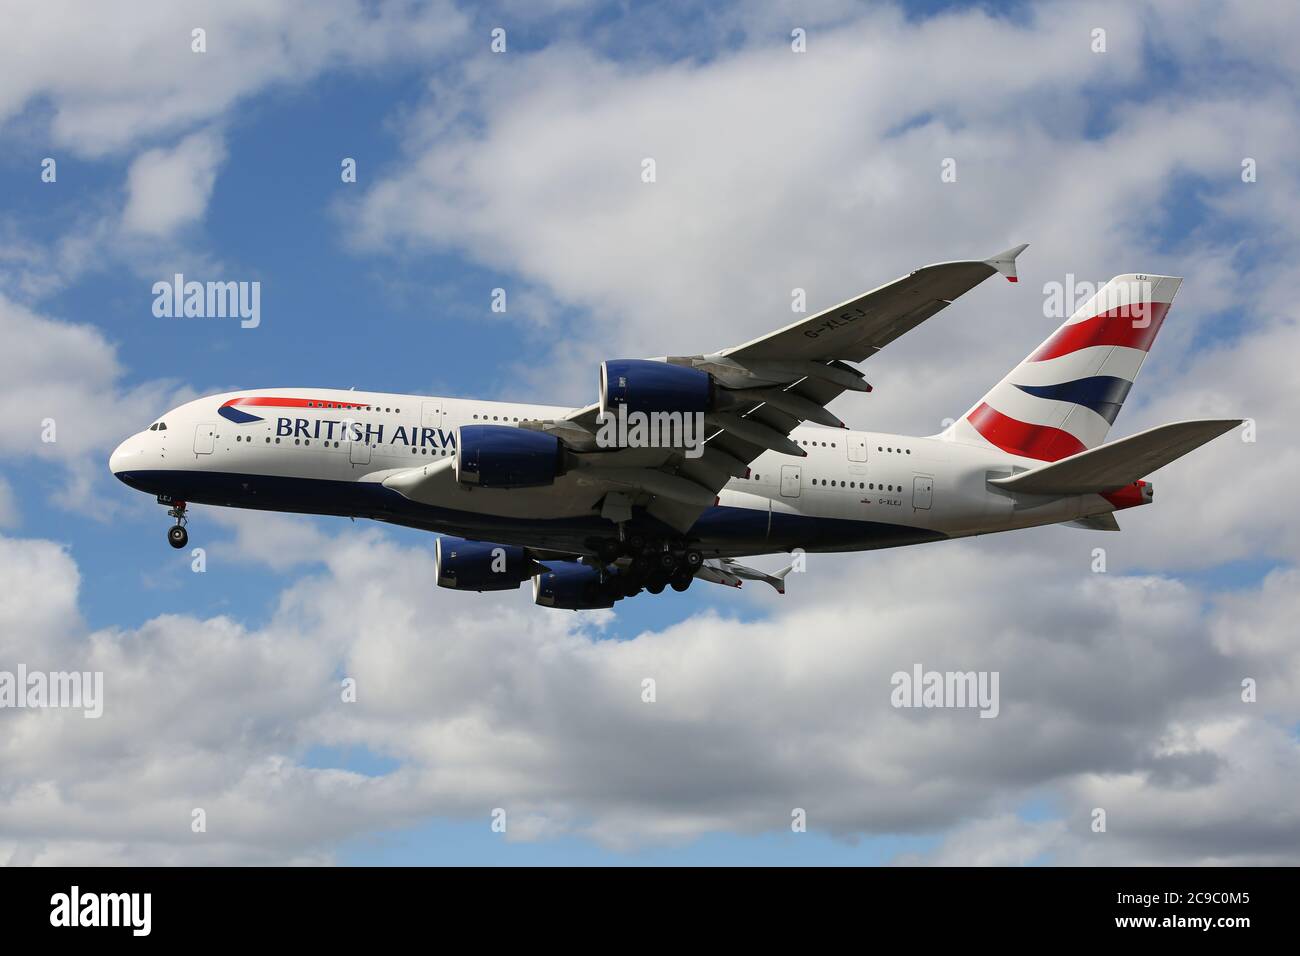 An Airbus A380-841 flying for British Airways lands at London Heathrow Airport Stock Photo